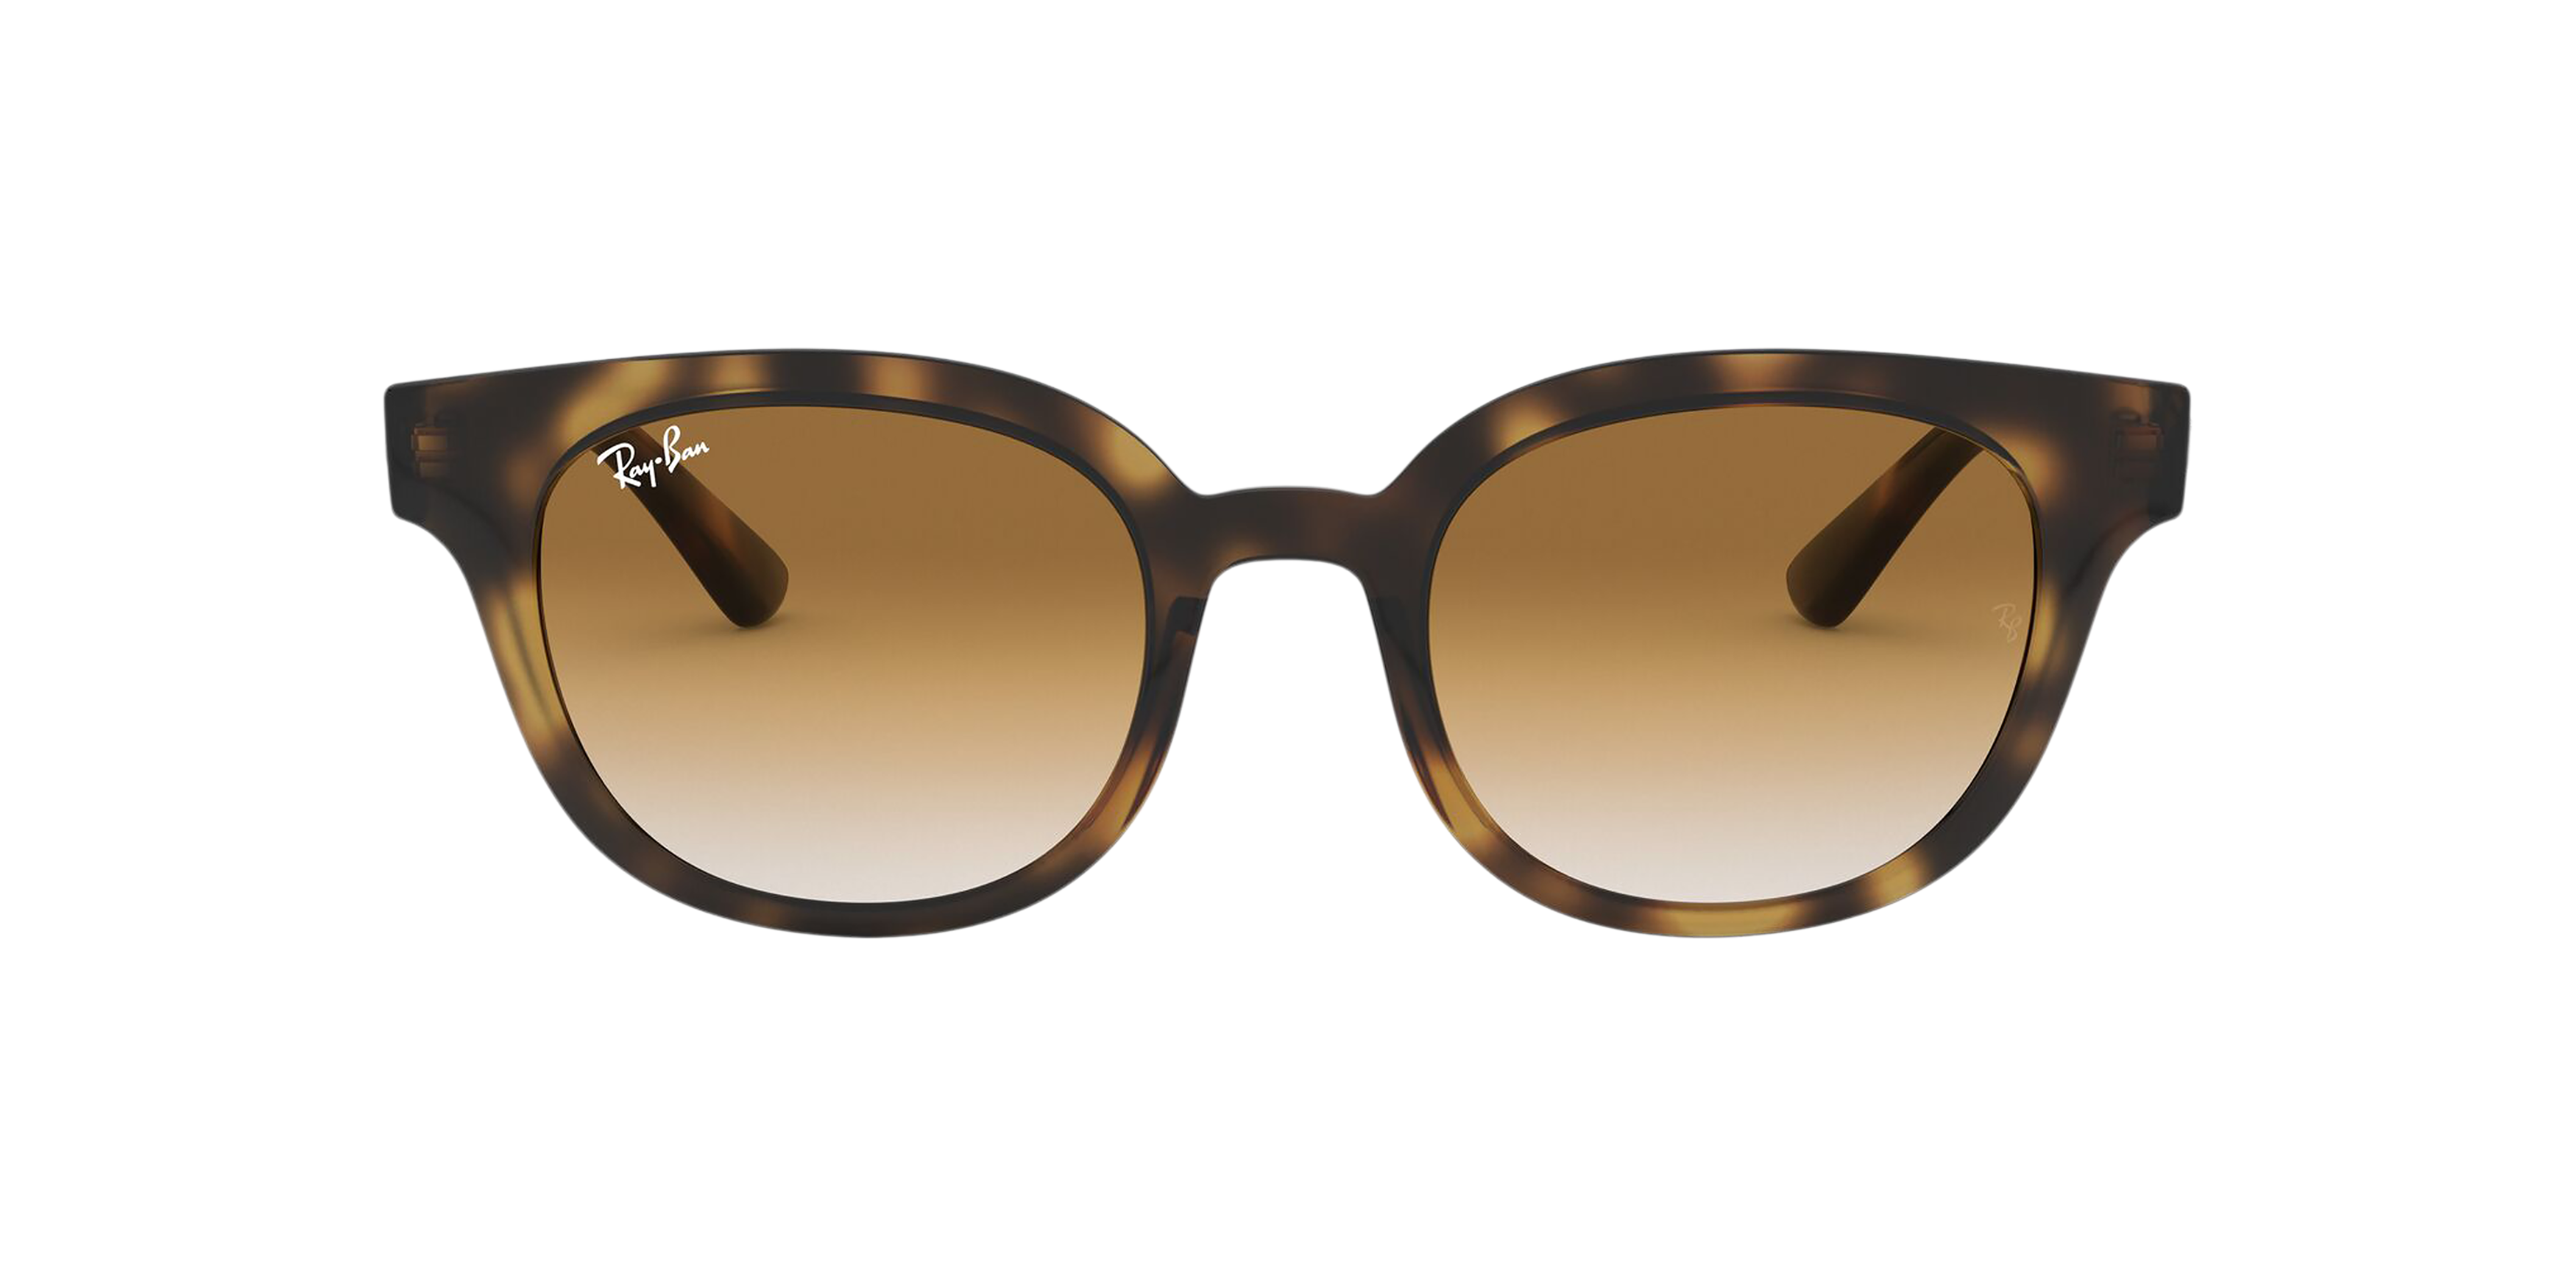 [products.image.front] Ray-Ban RB4324 710/51